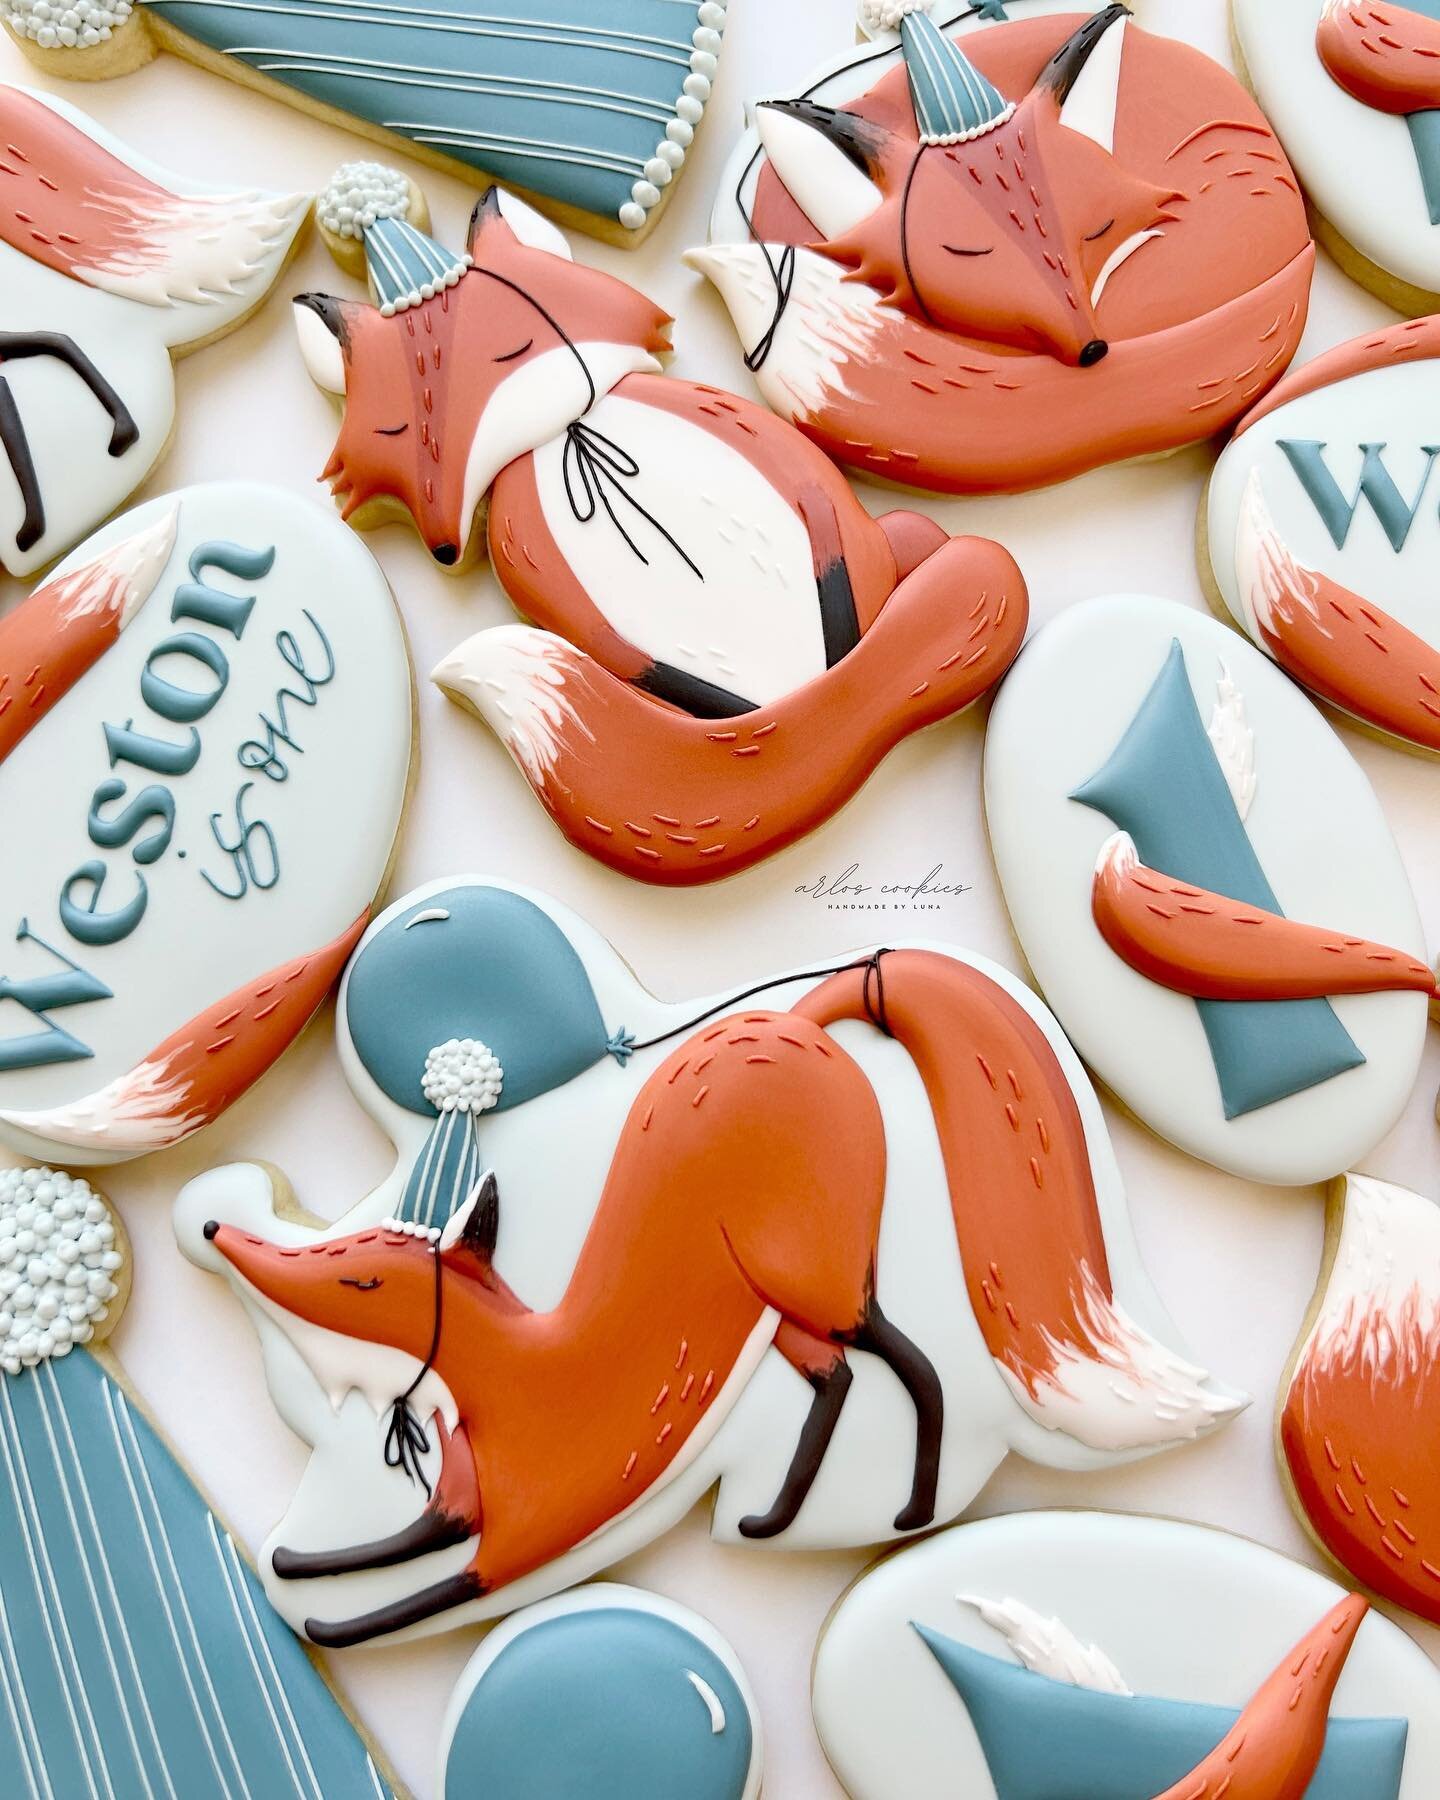 Aren&rsquo;t these the cutest little foxes you&rsquo;ve ever seen?! 🦊 

I made these cookies LAST summer and I can&rsquo;t believe I haven&rsquo;t shared them yet! There are actually a lot of sets from last year that I still need to share 🙃

Oval c